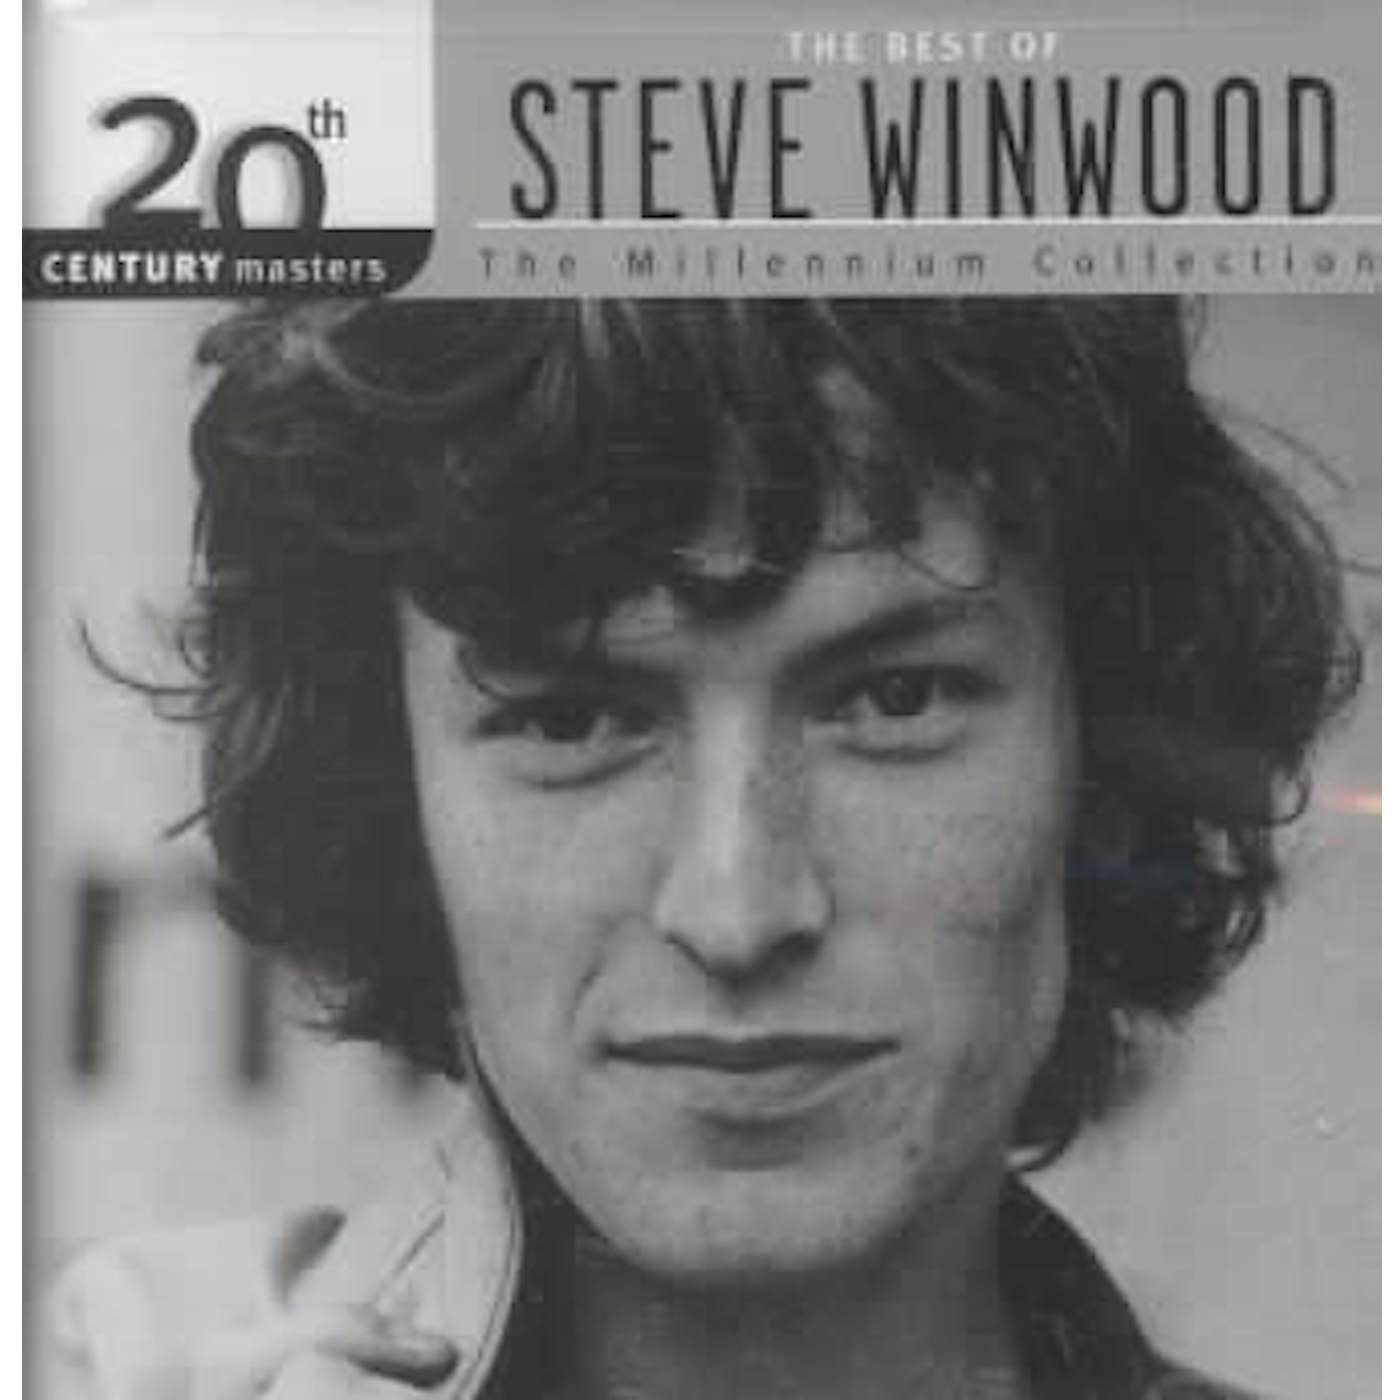 Steve Winwood Millennium Collection - 20th Century Masters CD